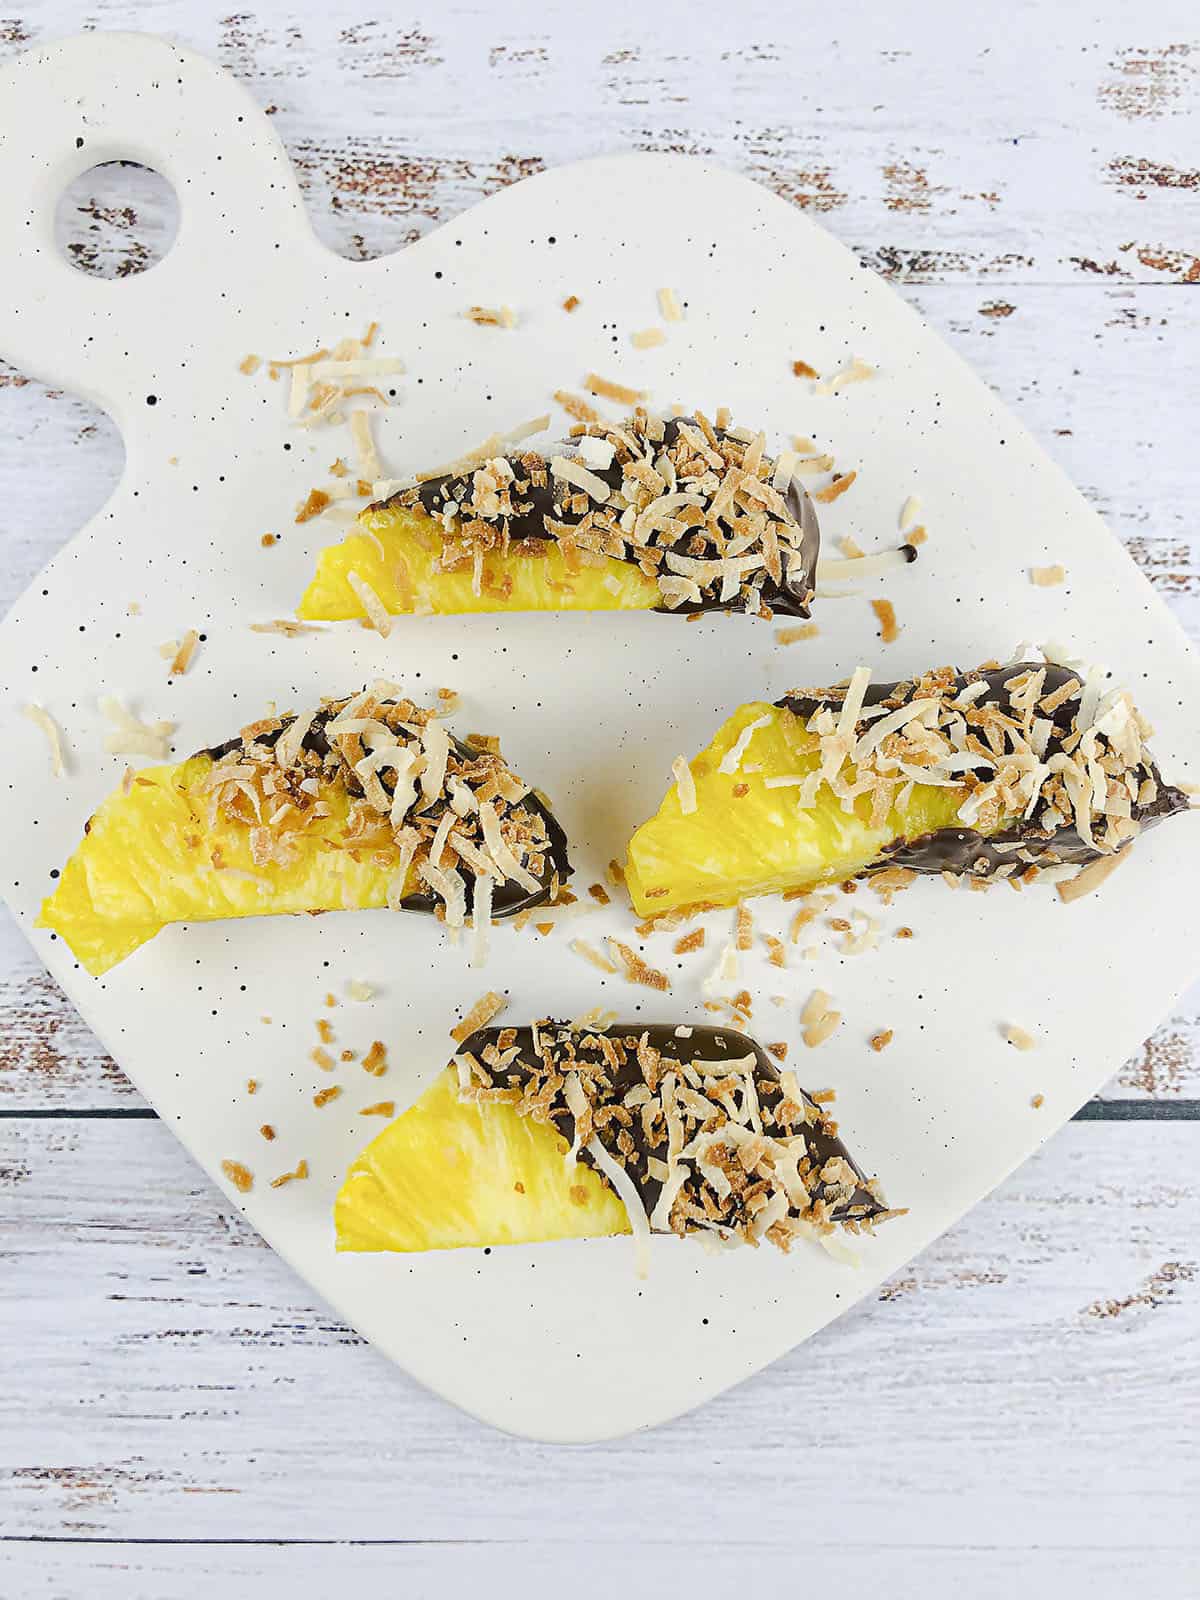 Pineapple spears with chocolate and coconut on a speckled serving tray.